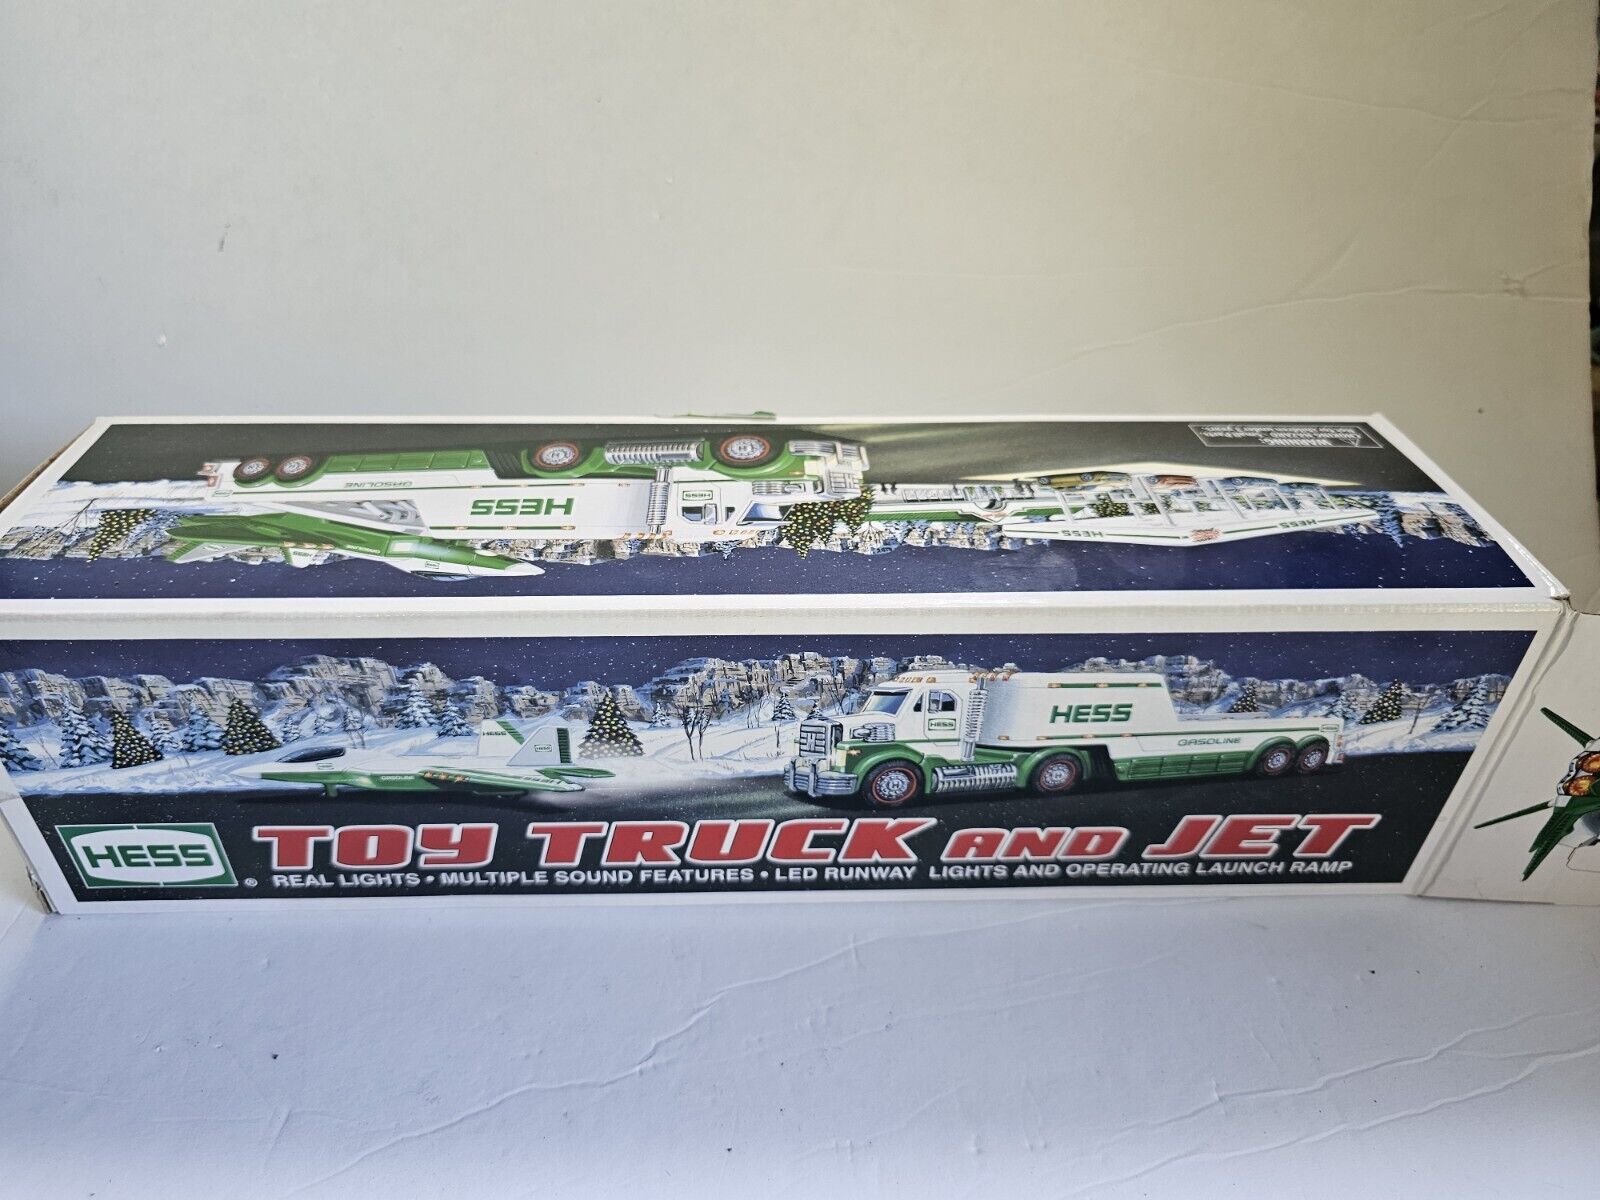 2010 Hess Toy Truck and Jet New in Box, Green White Truck Collectable Toy 